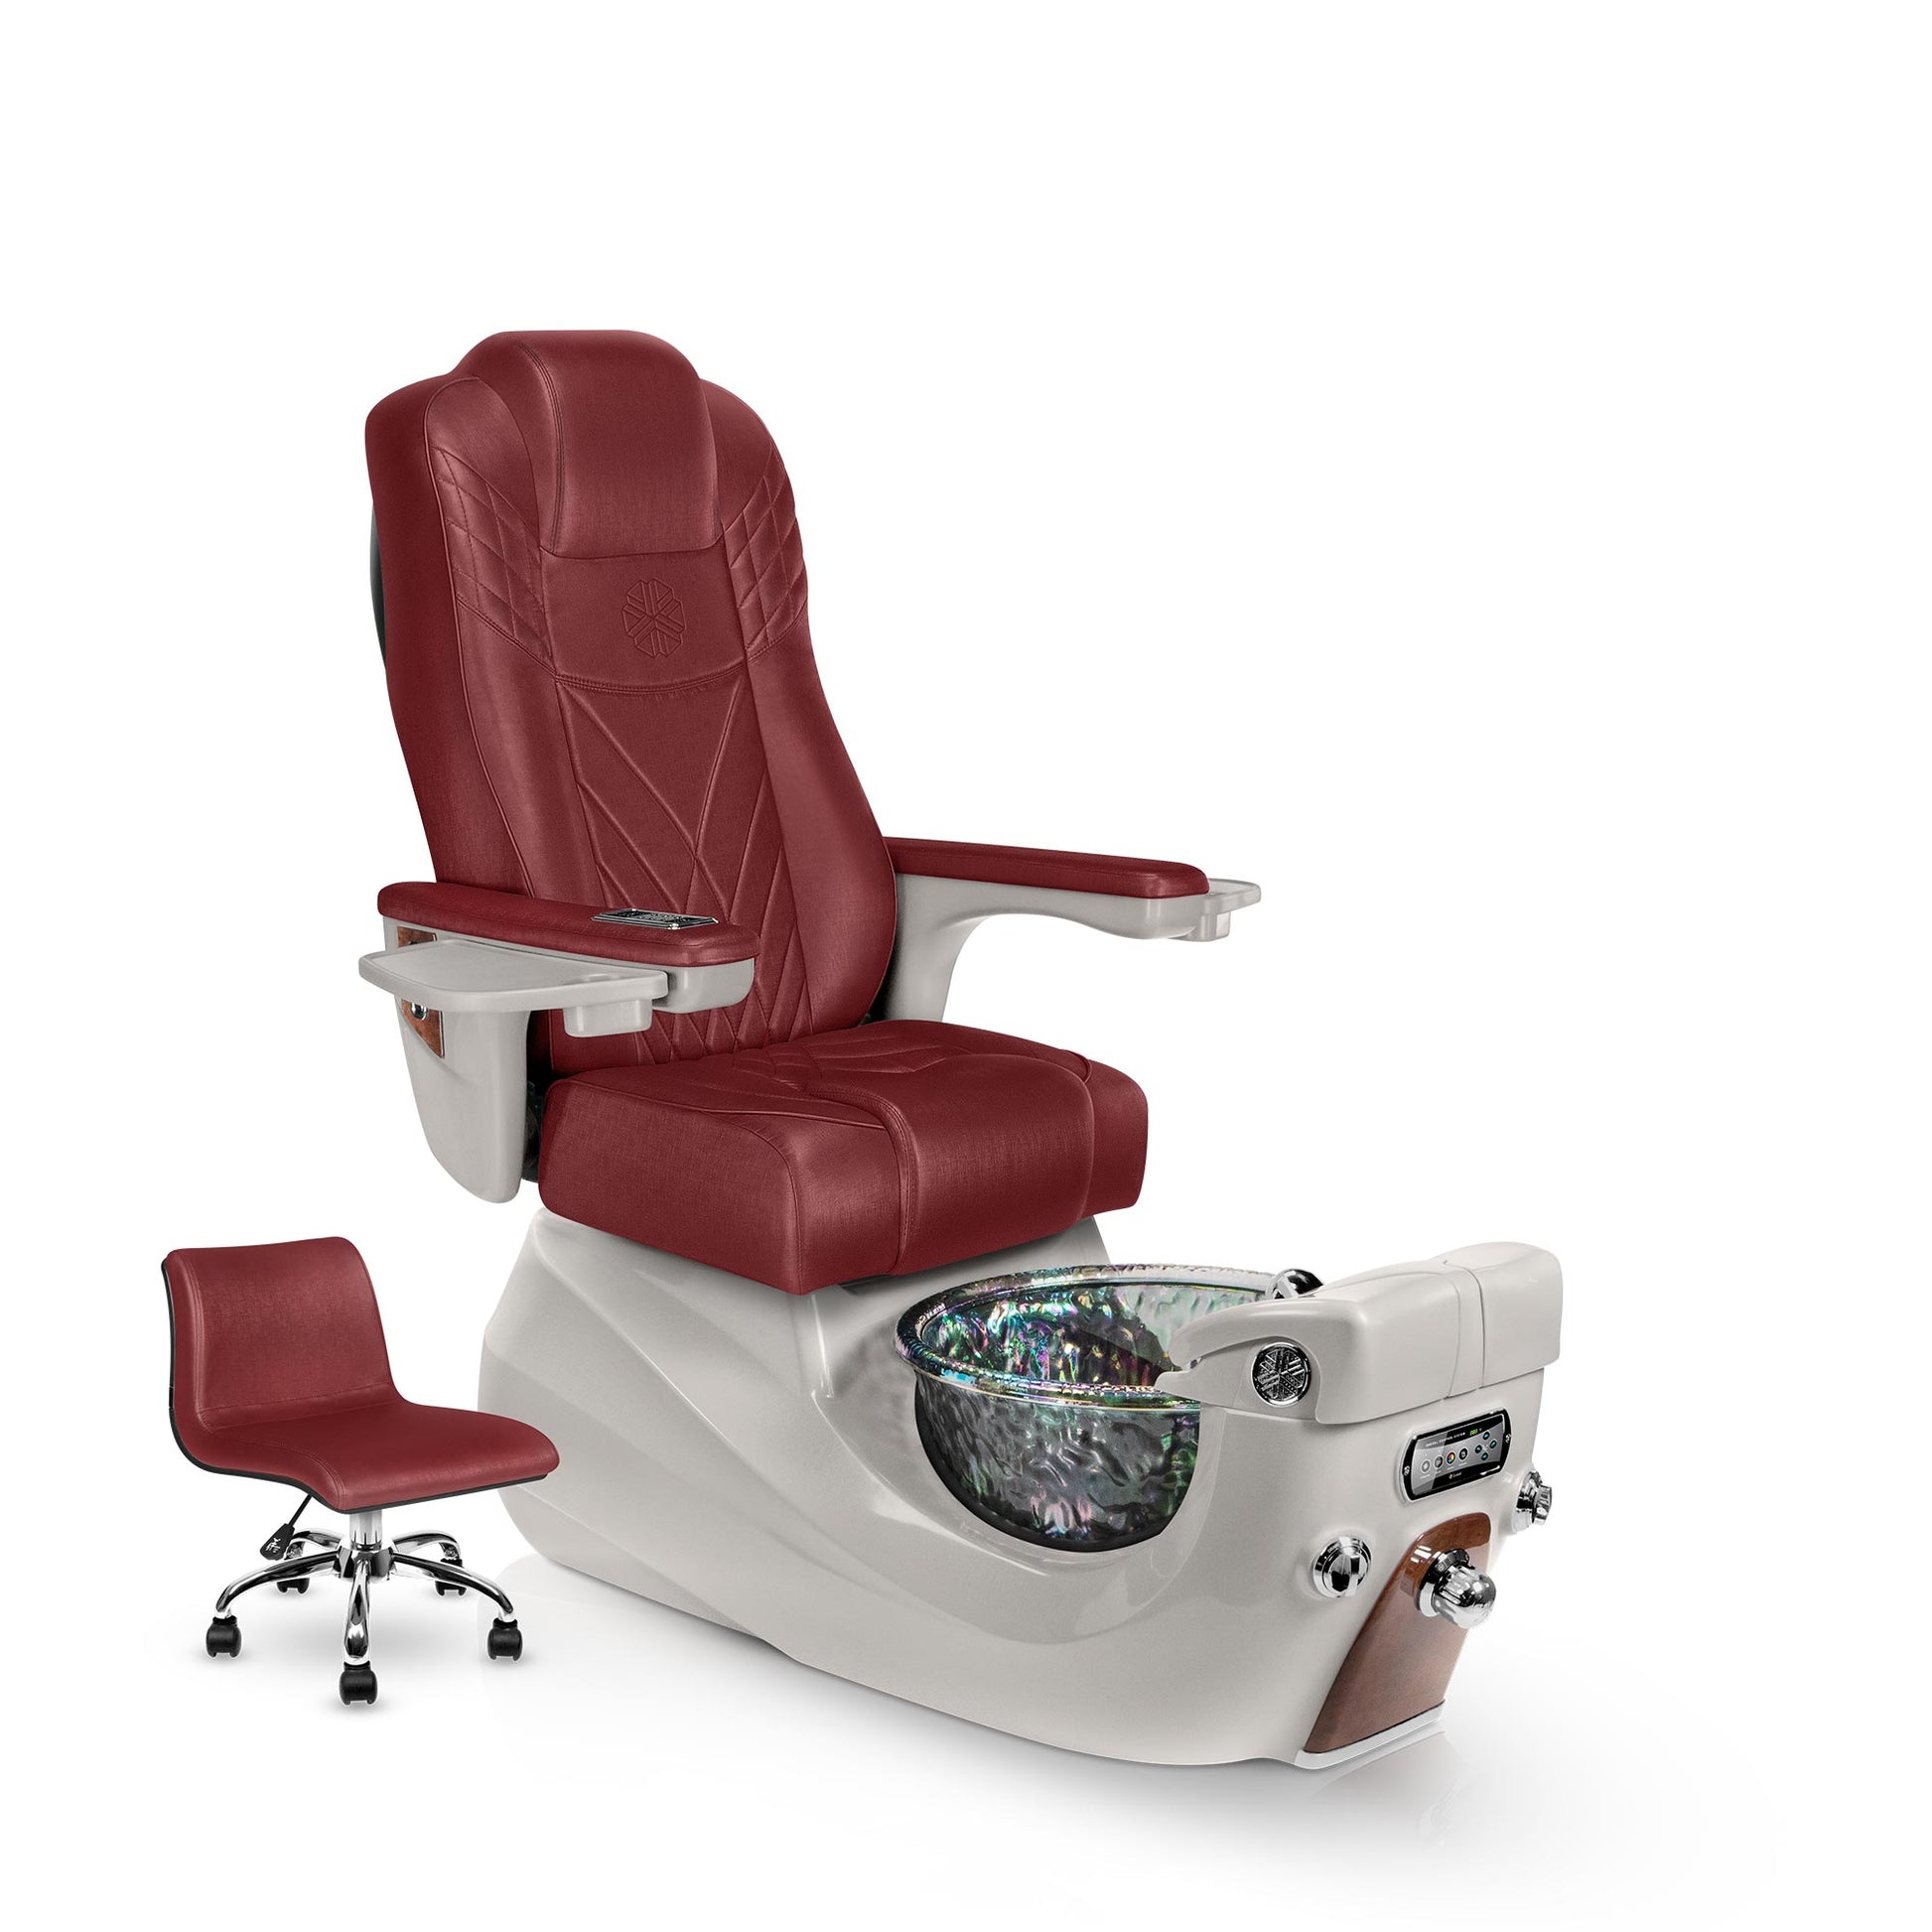 Lexor LIBERTÉ pedicure chair with ruby cushion and sandstone spa base